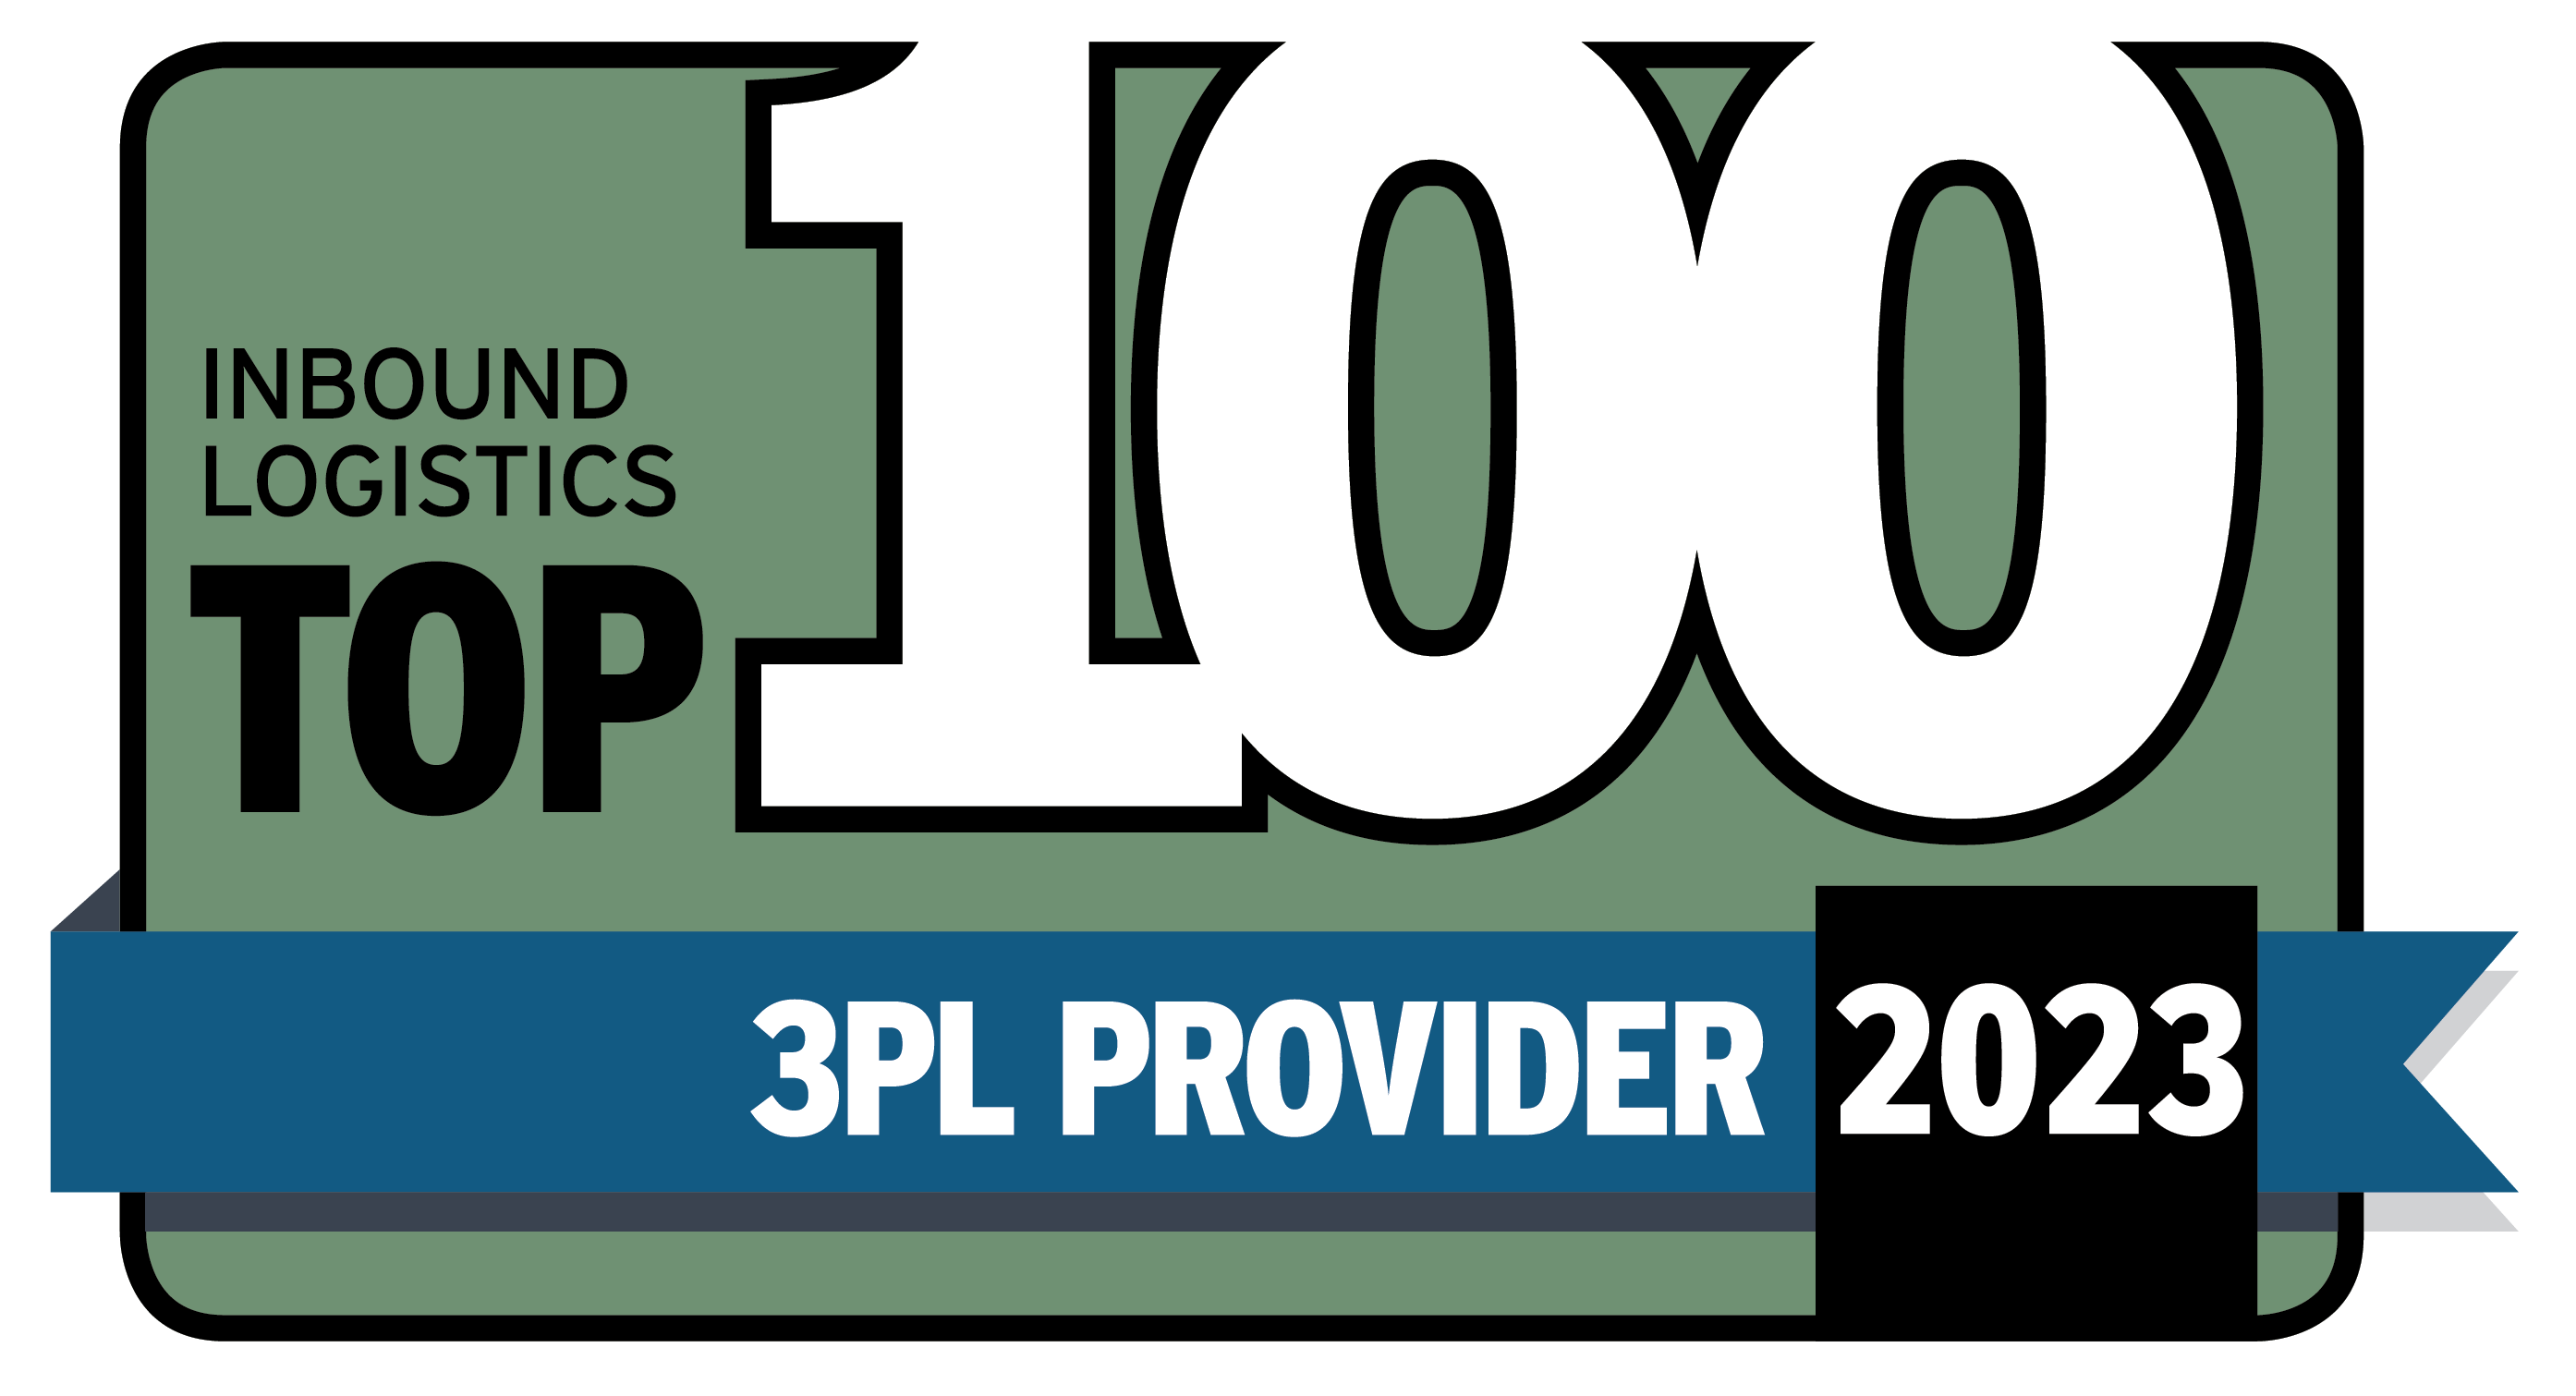 Logistics Plus Selected as a 2023 Top 100 3PL Provider by Inbound Logistics